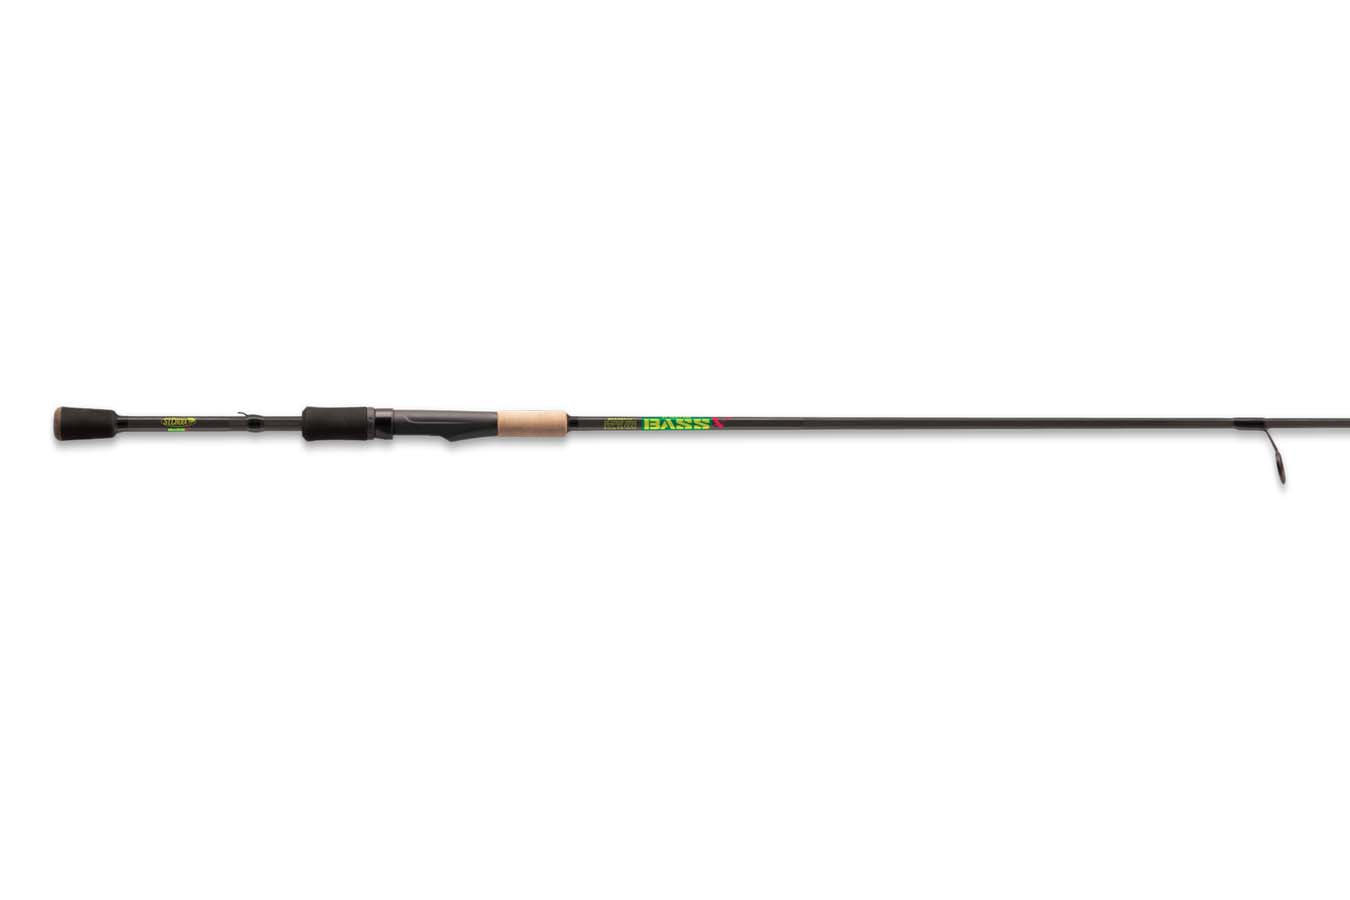 Discount St Croix Bass X 6ft 8in Spinning Rod MXF for Sale